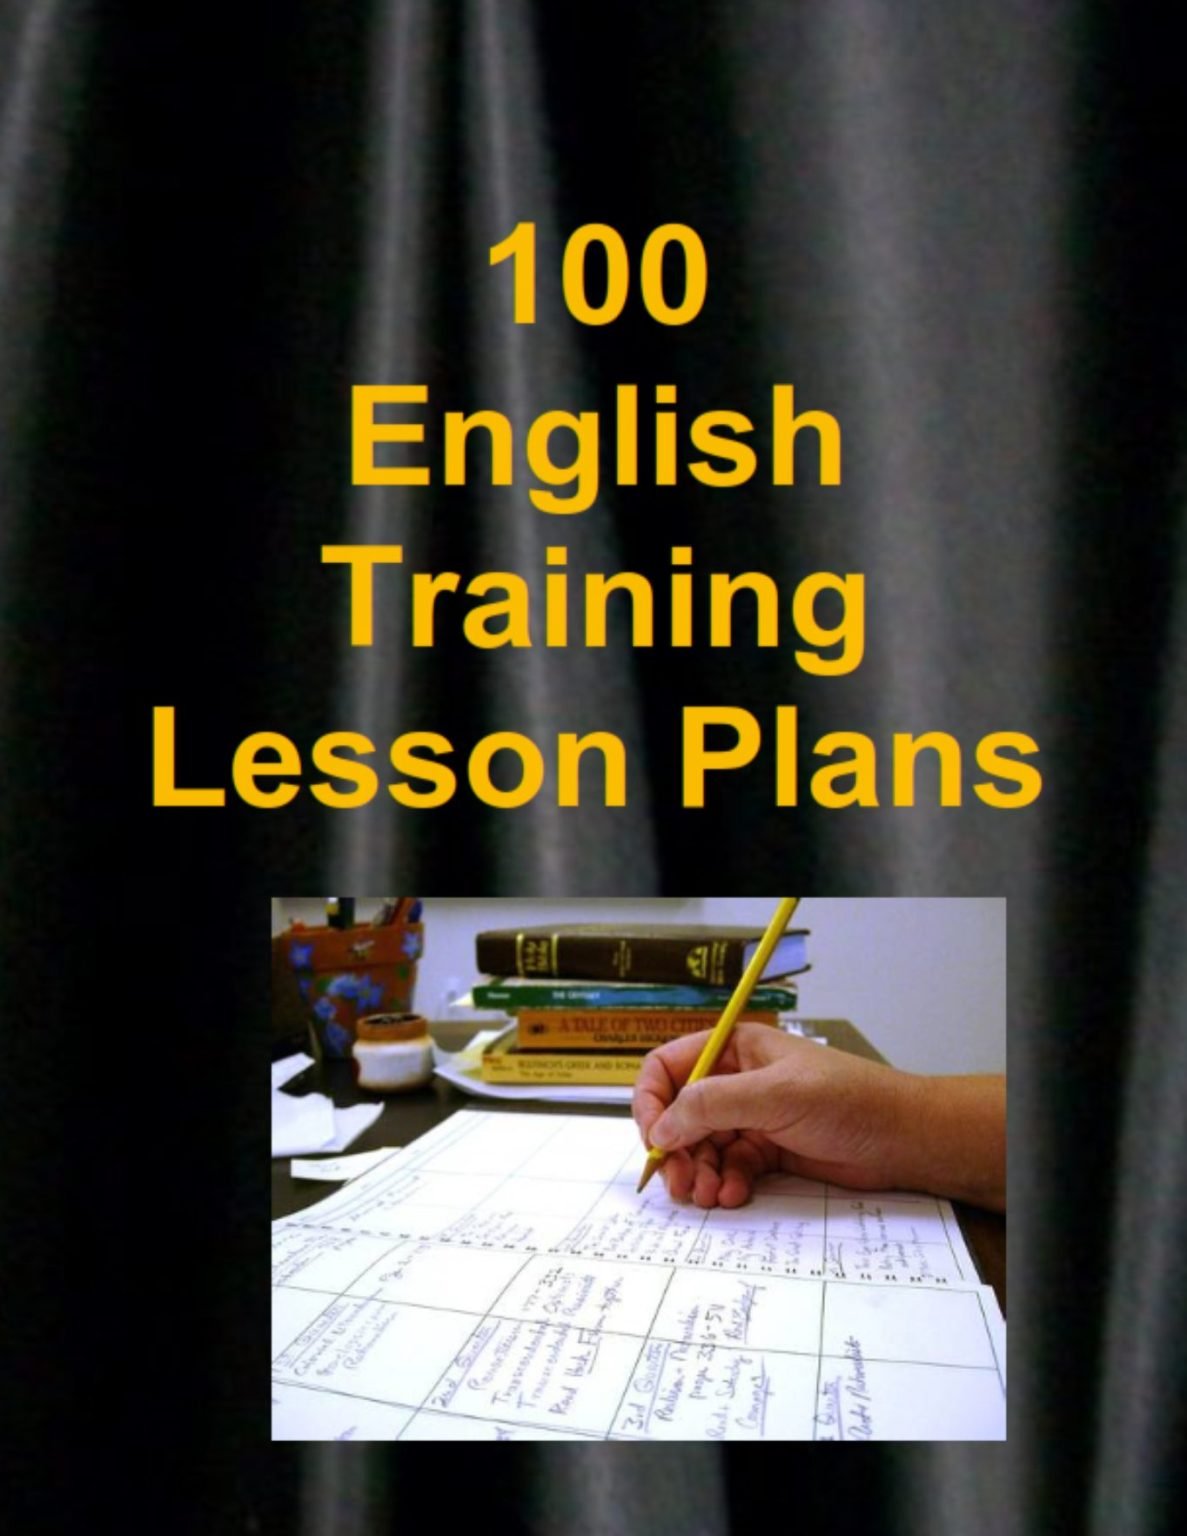 Rich results on Google's SERP when searching for ''100-English-Training-Lesson-Plans''